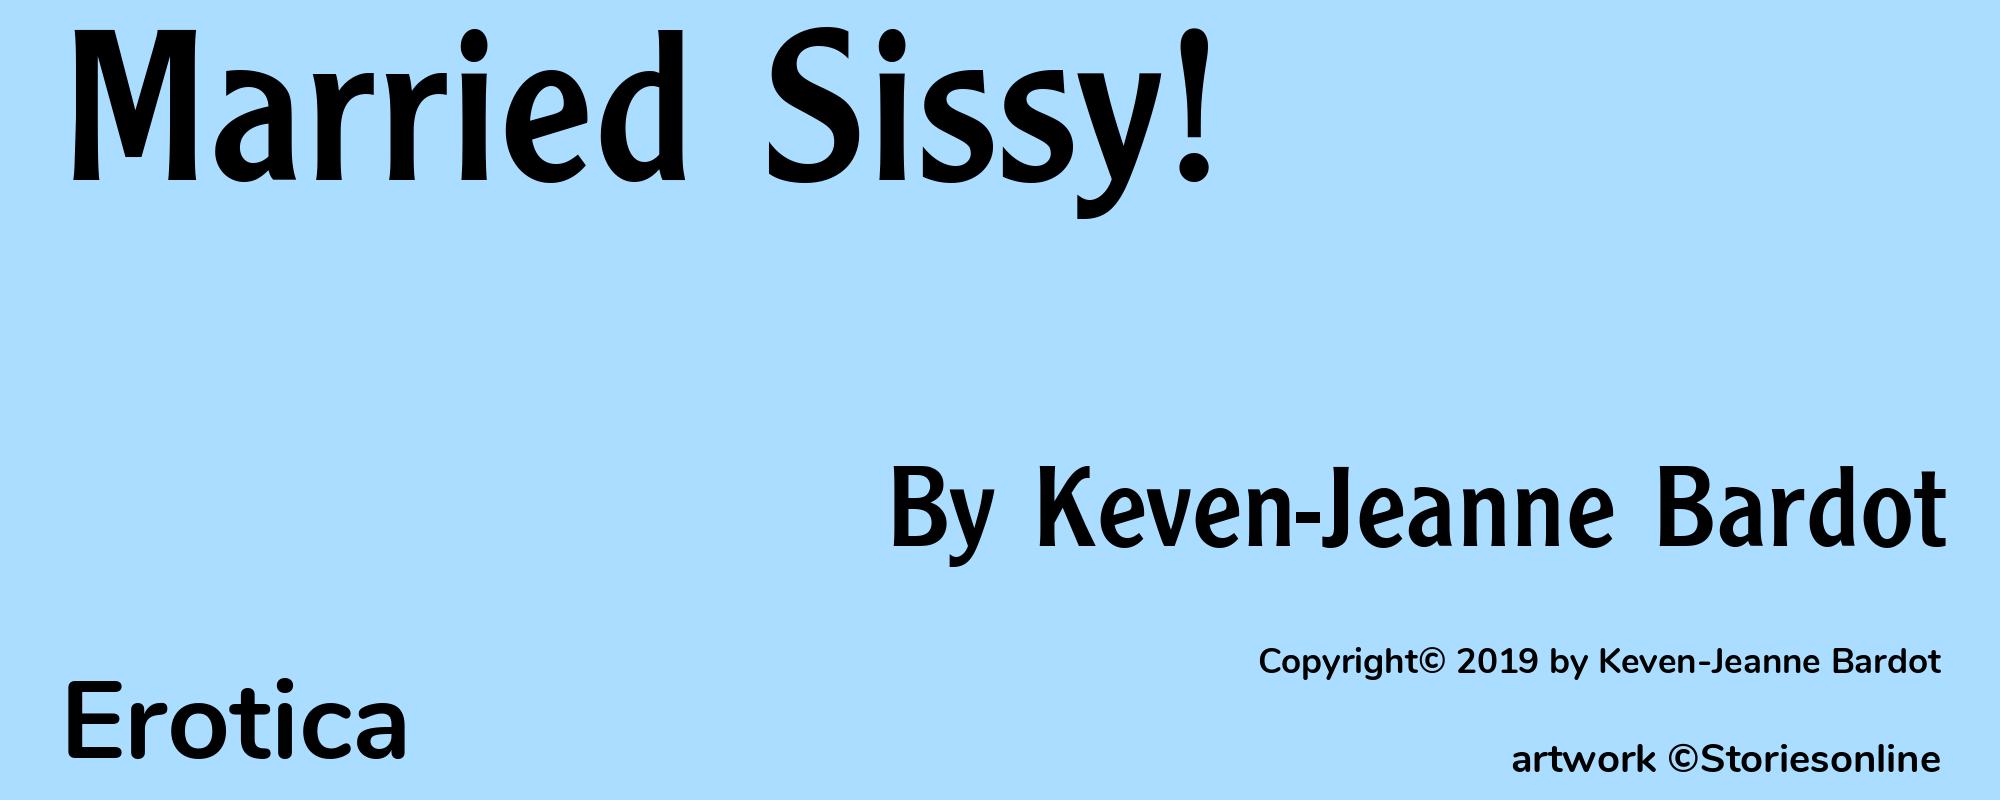 Married Sissy! - Cover